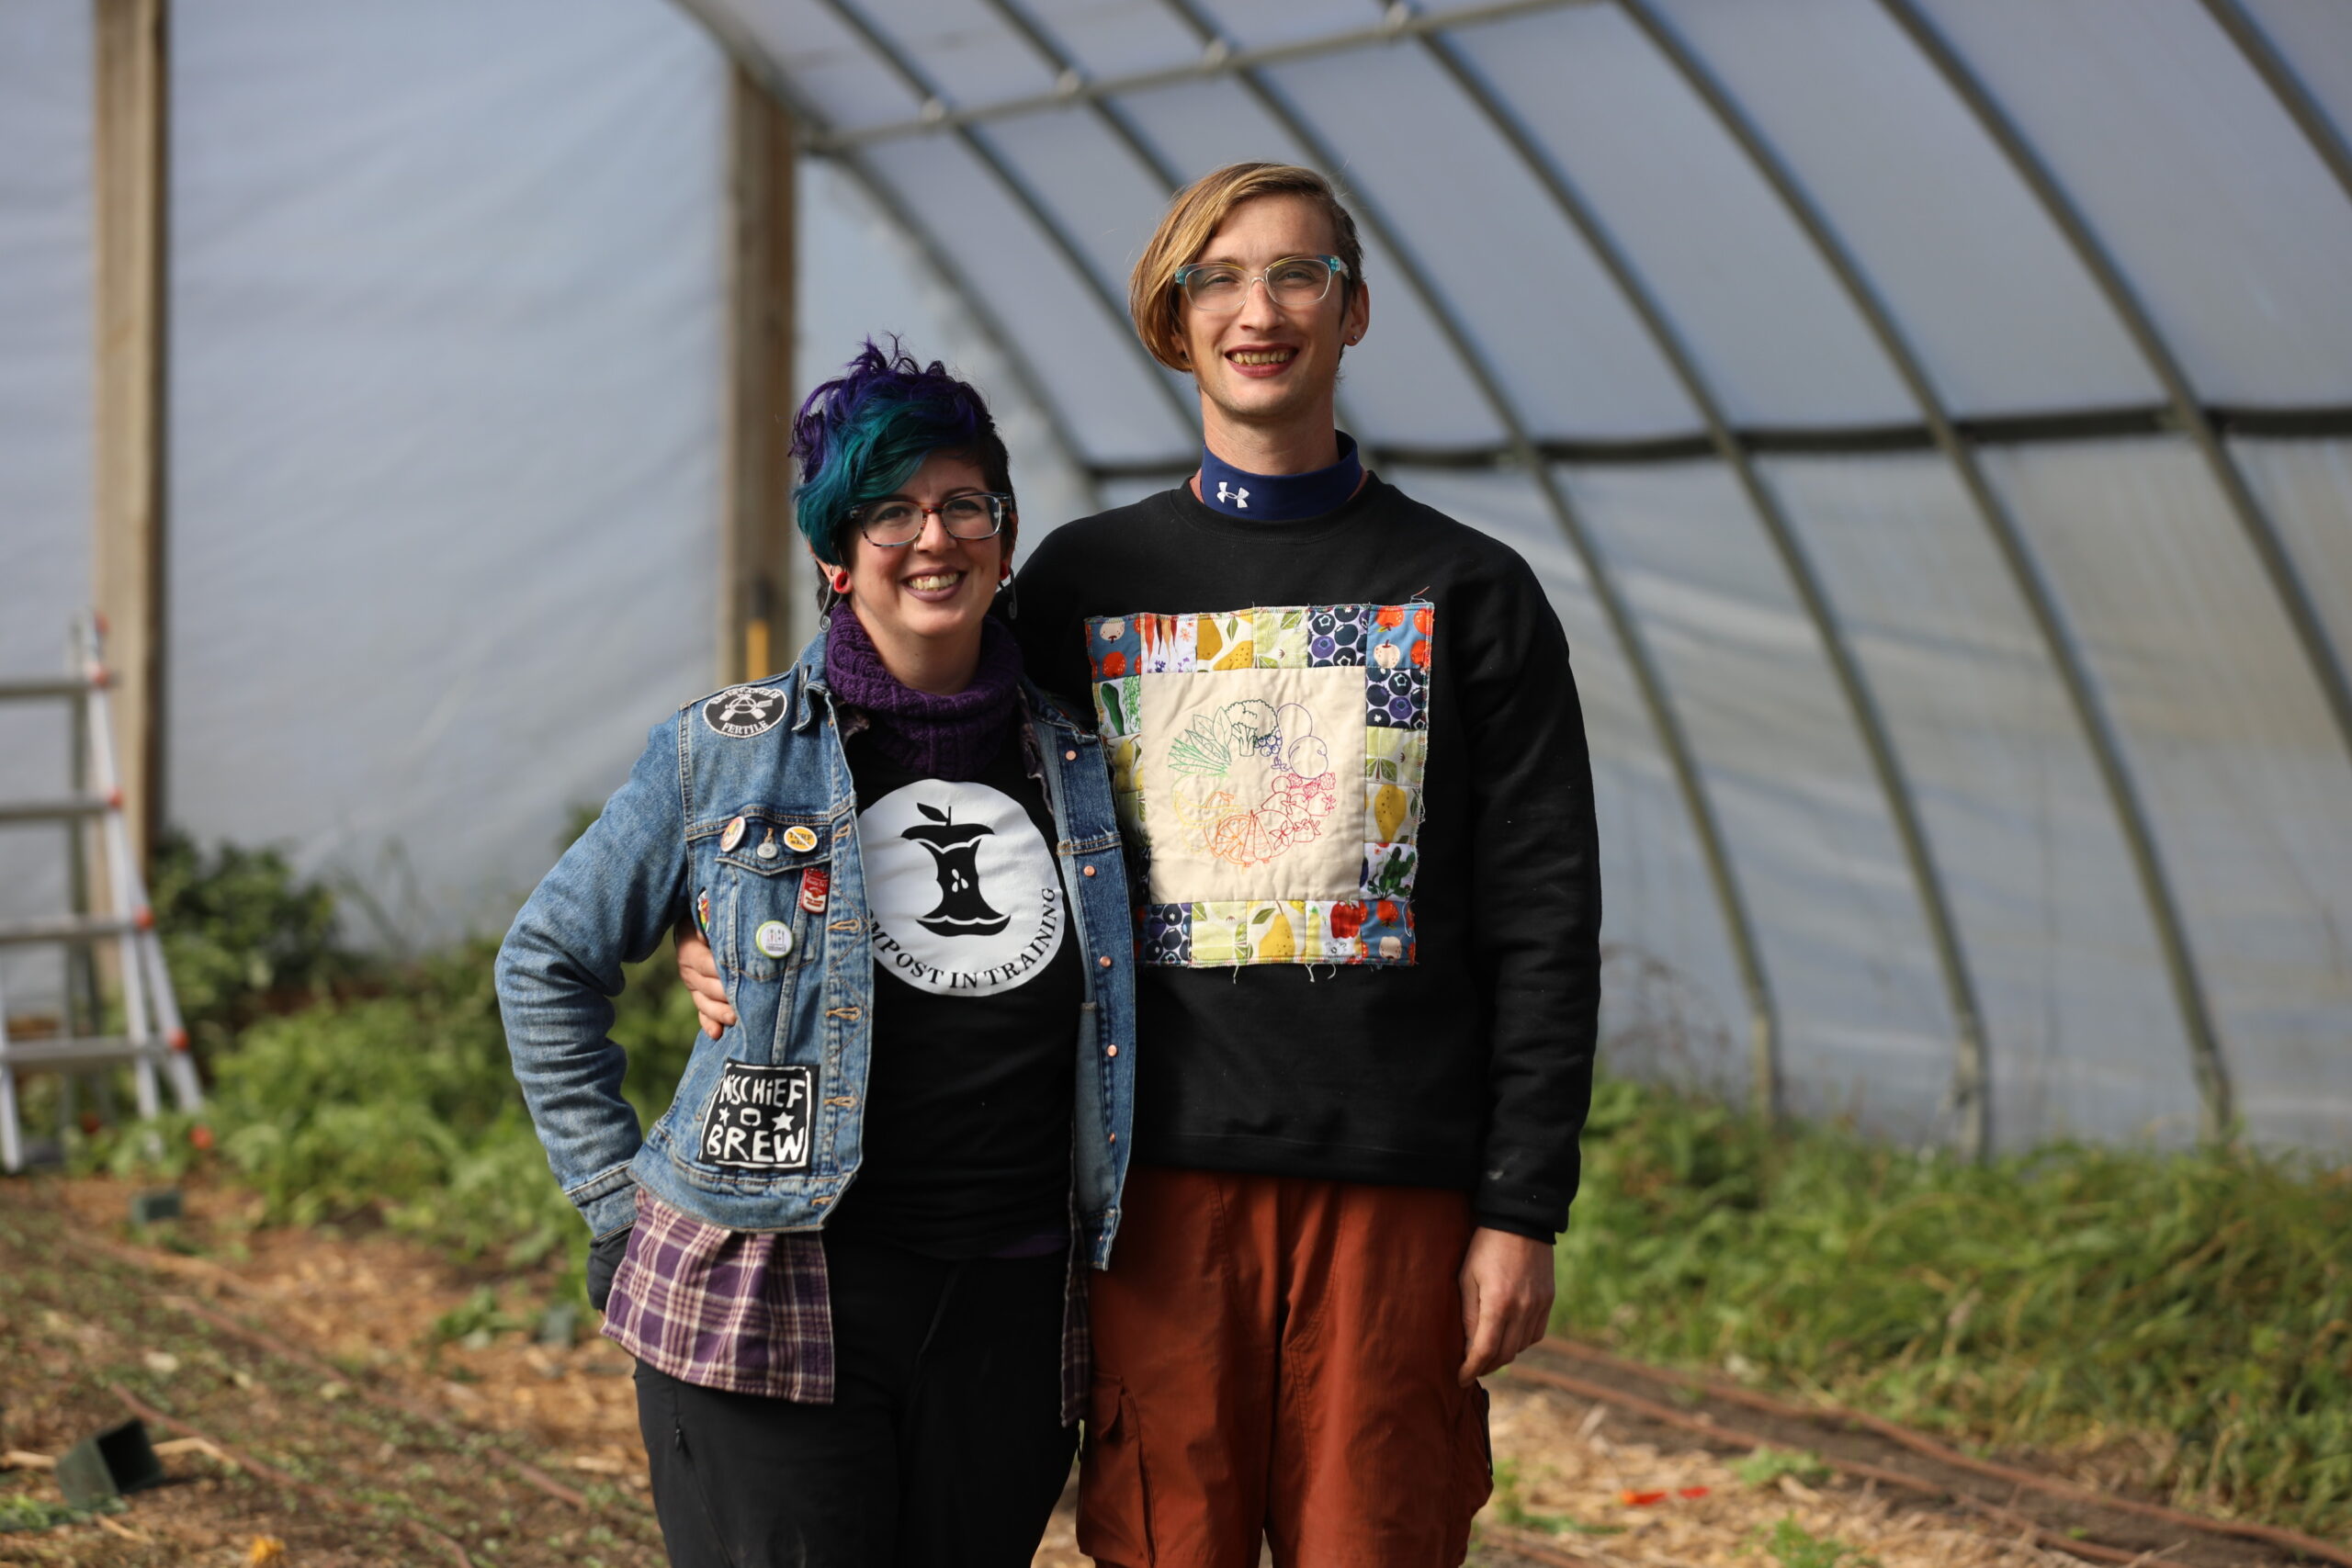 Queering the family farm: Despite obstacles, LGBTQ farmers find fertile ground in Midwest